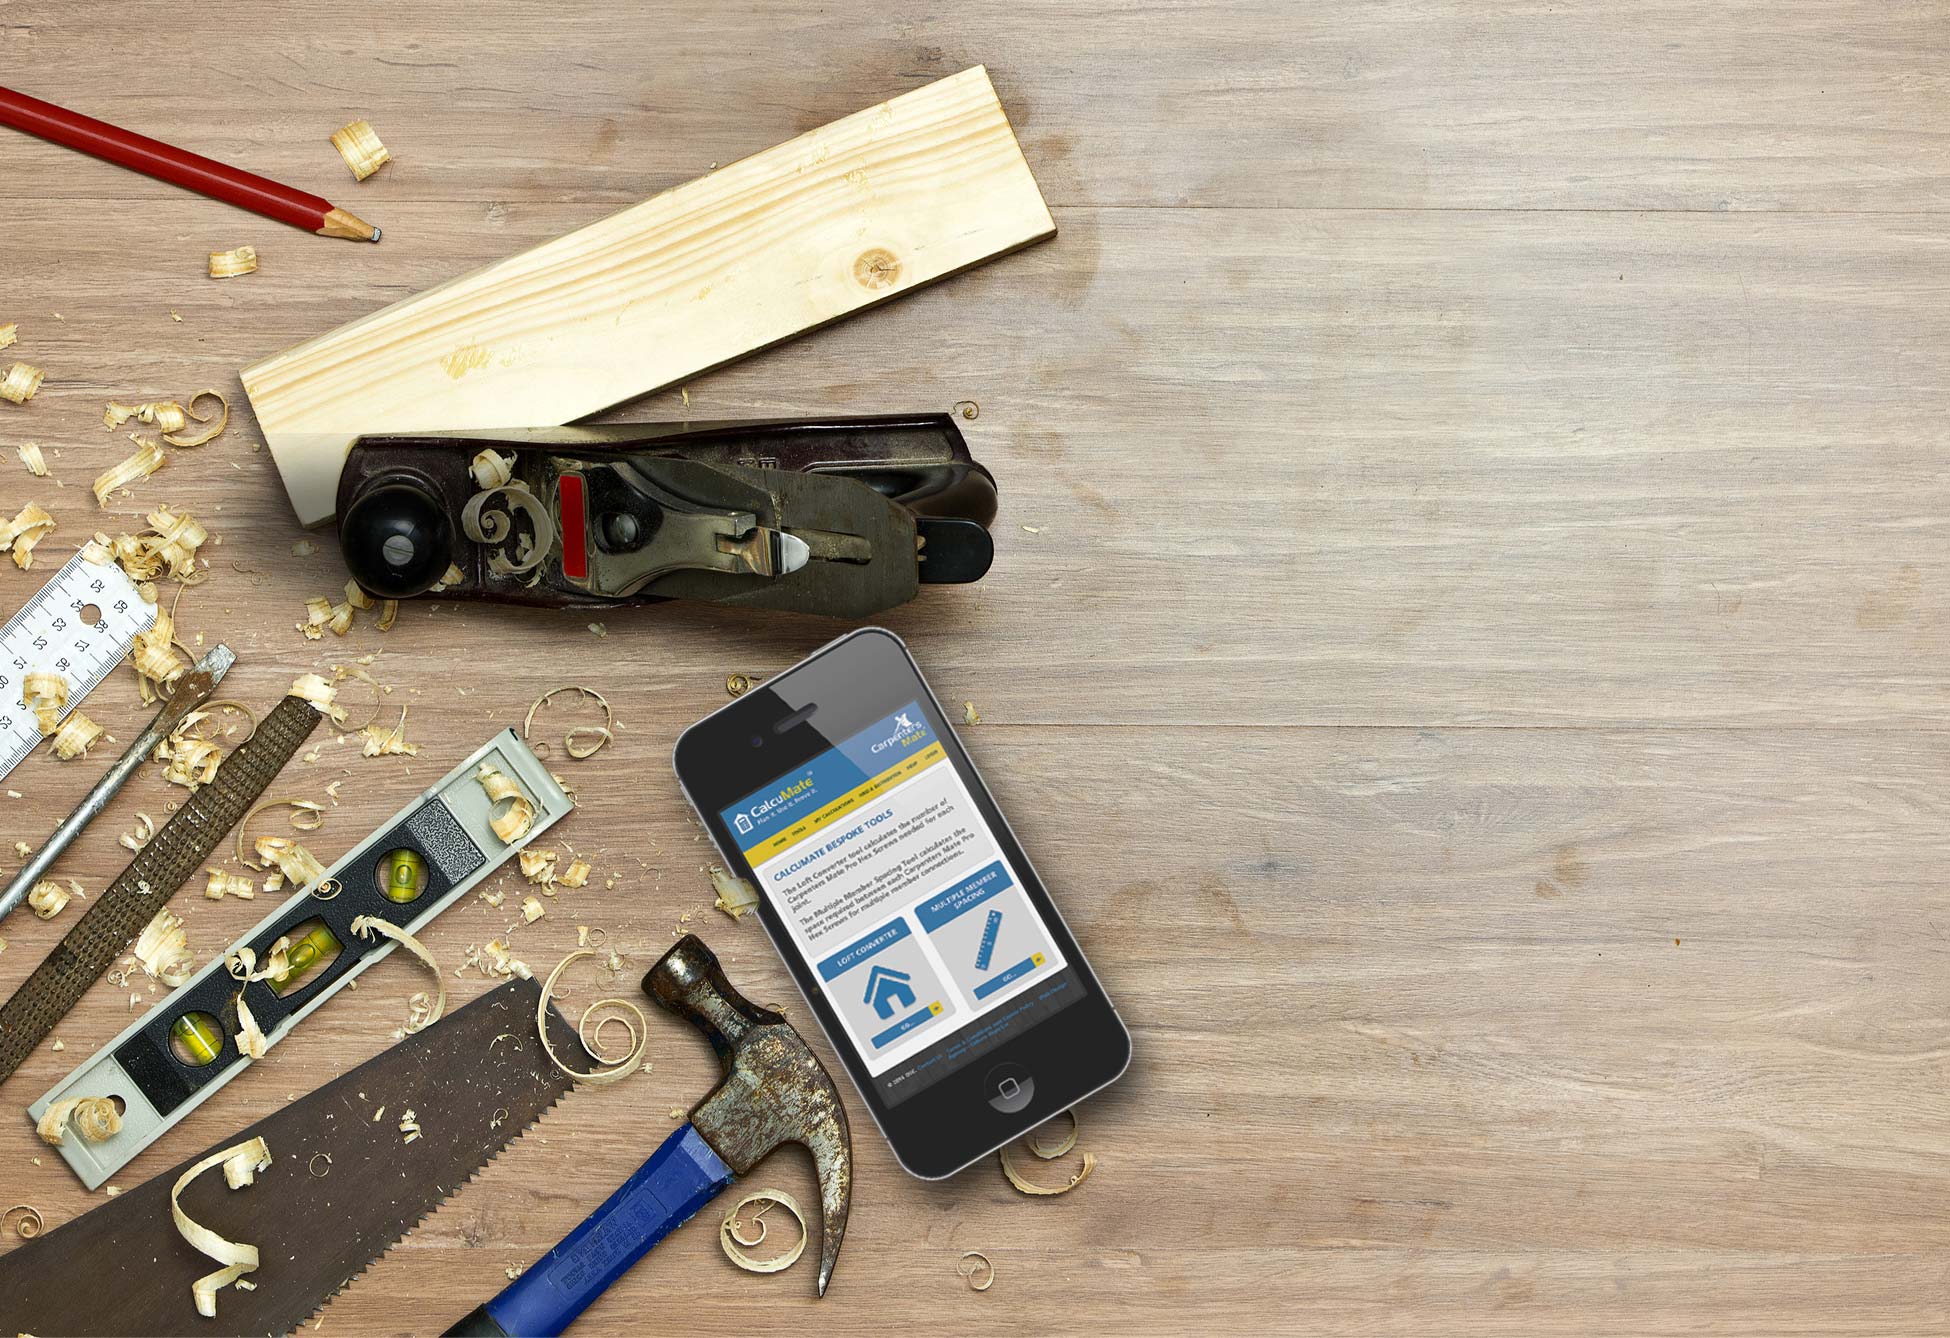 Professional Builder puts CalcuMate to the test